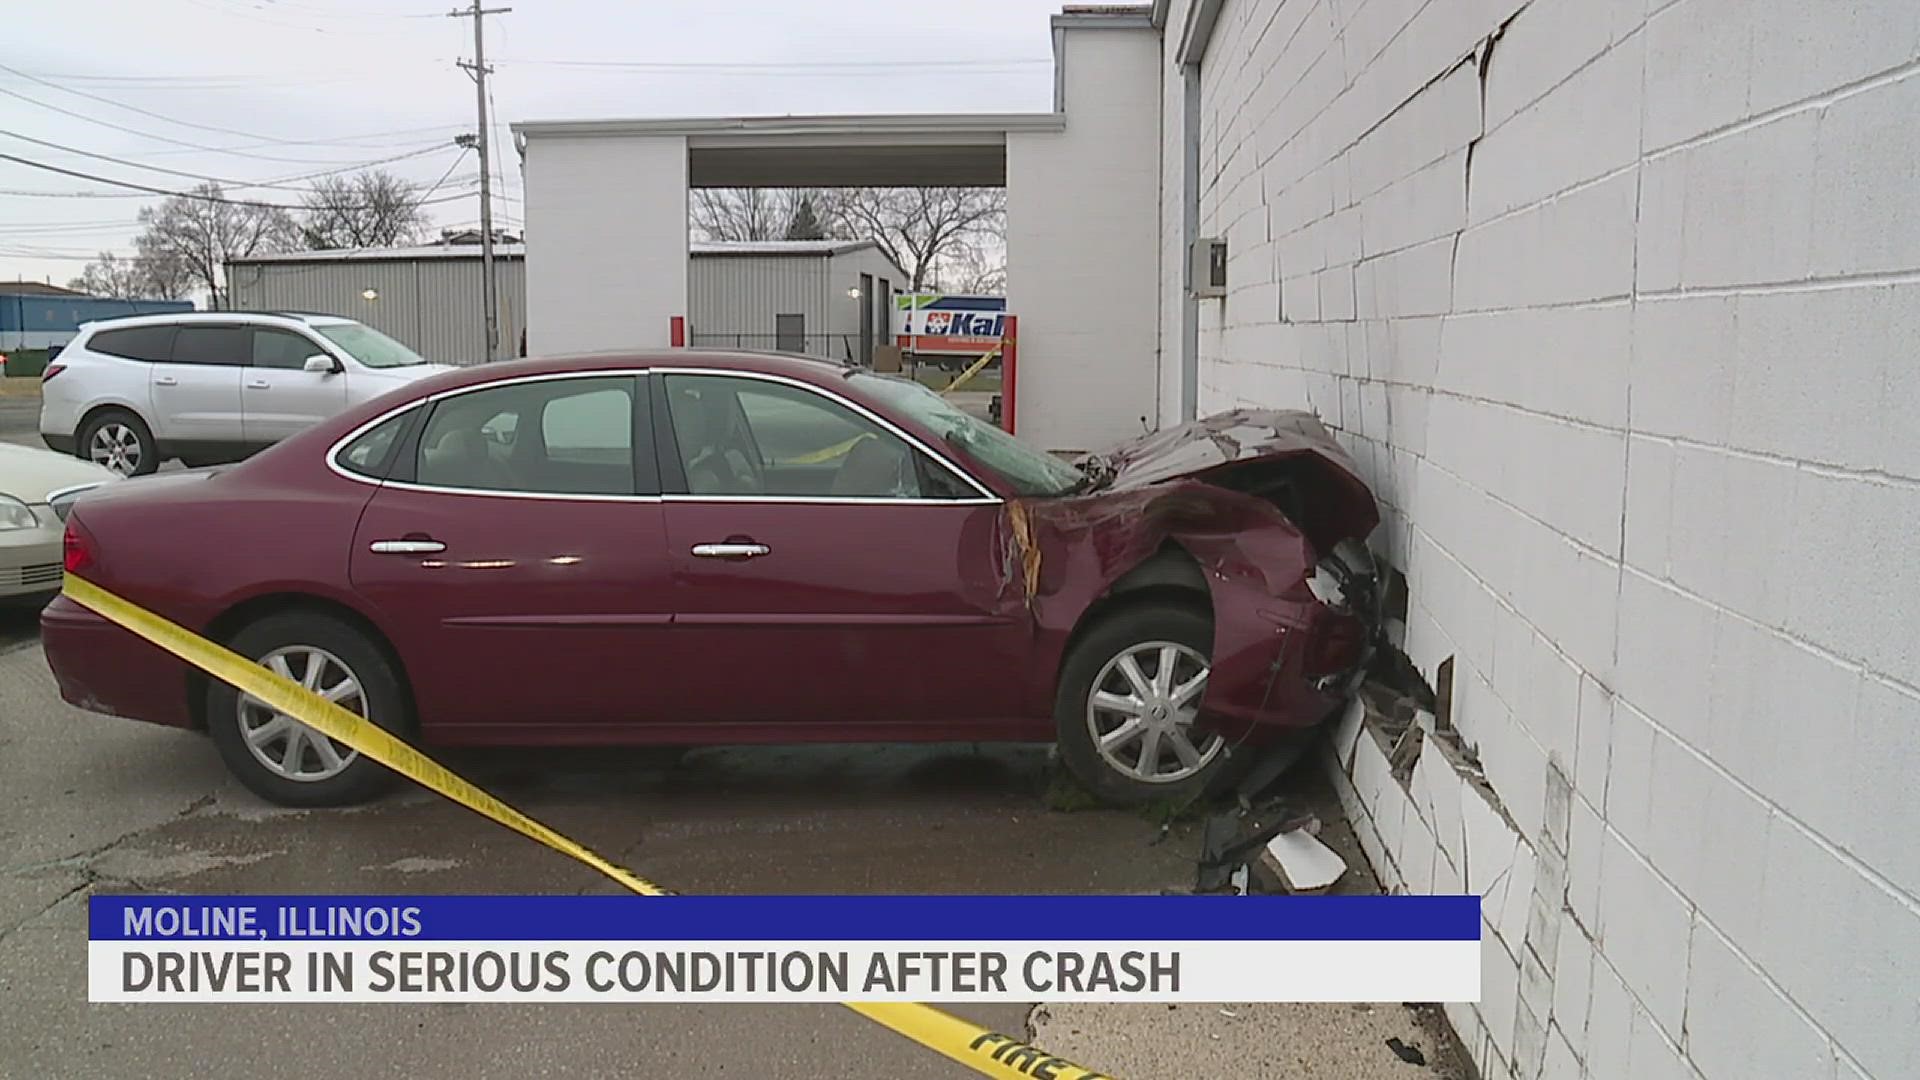 Police said that the driver suffered a medical emergency that caused her to crash into a building on 39th Avenue.